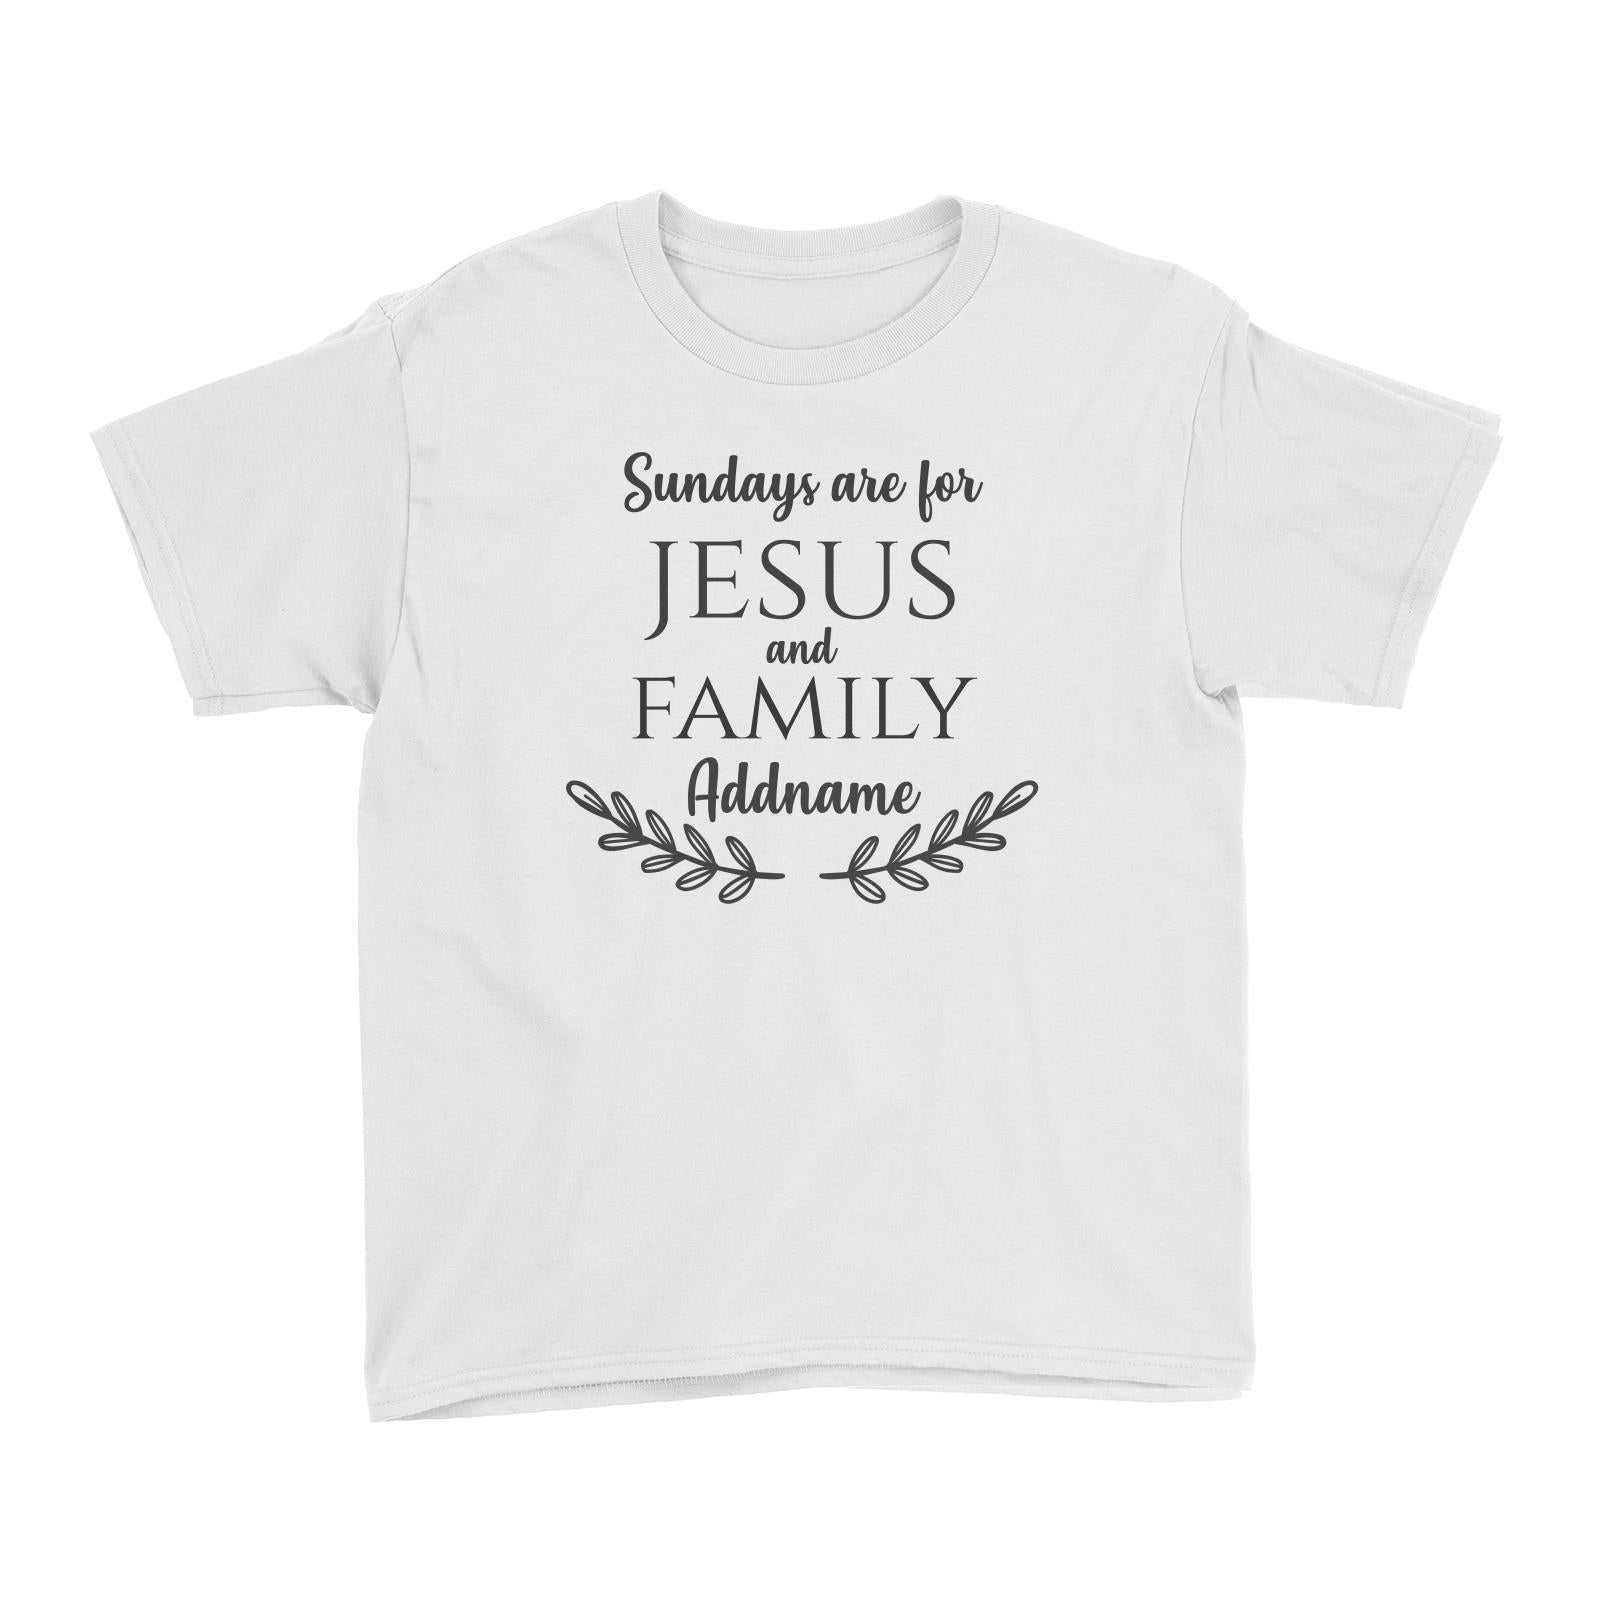 Christian Series Sundays Are For Jesus And Family Addname Kid's T-Shirt